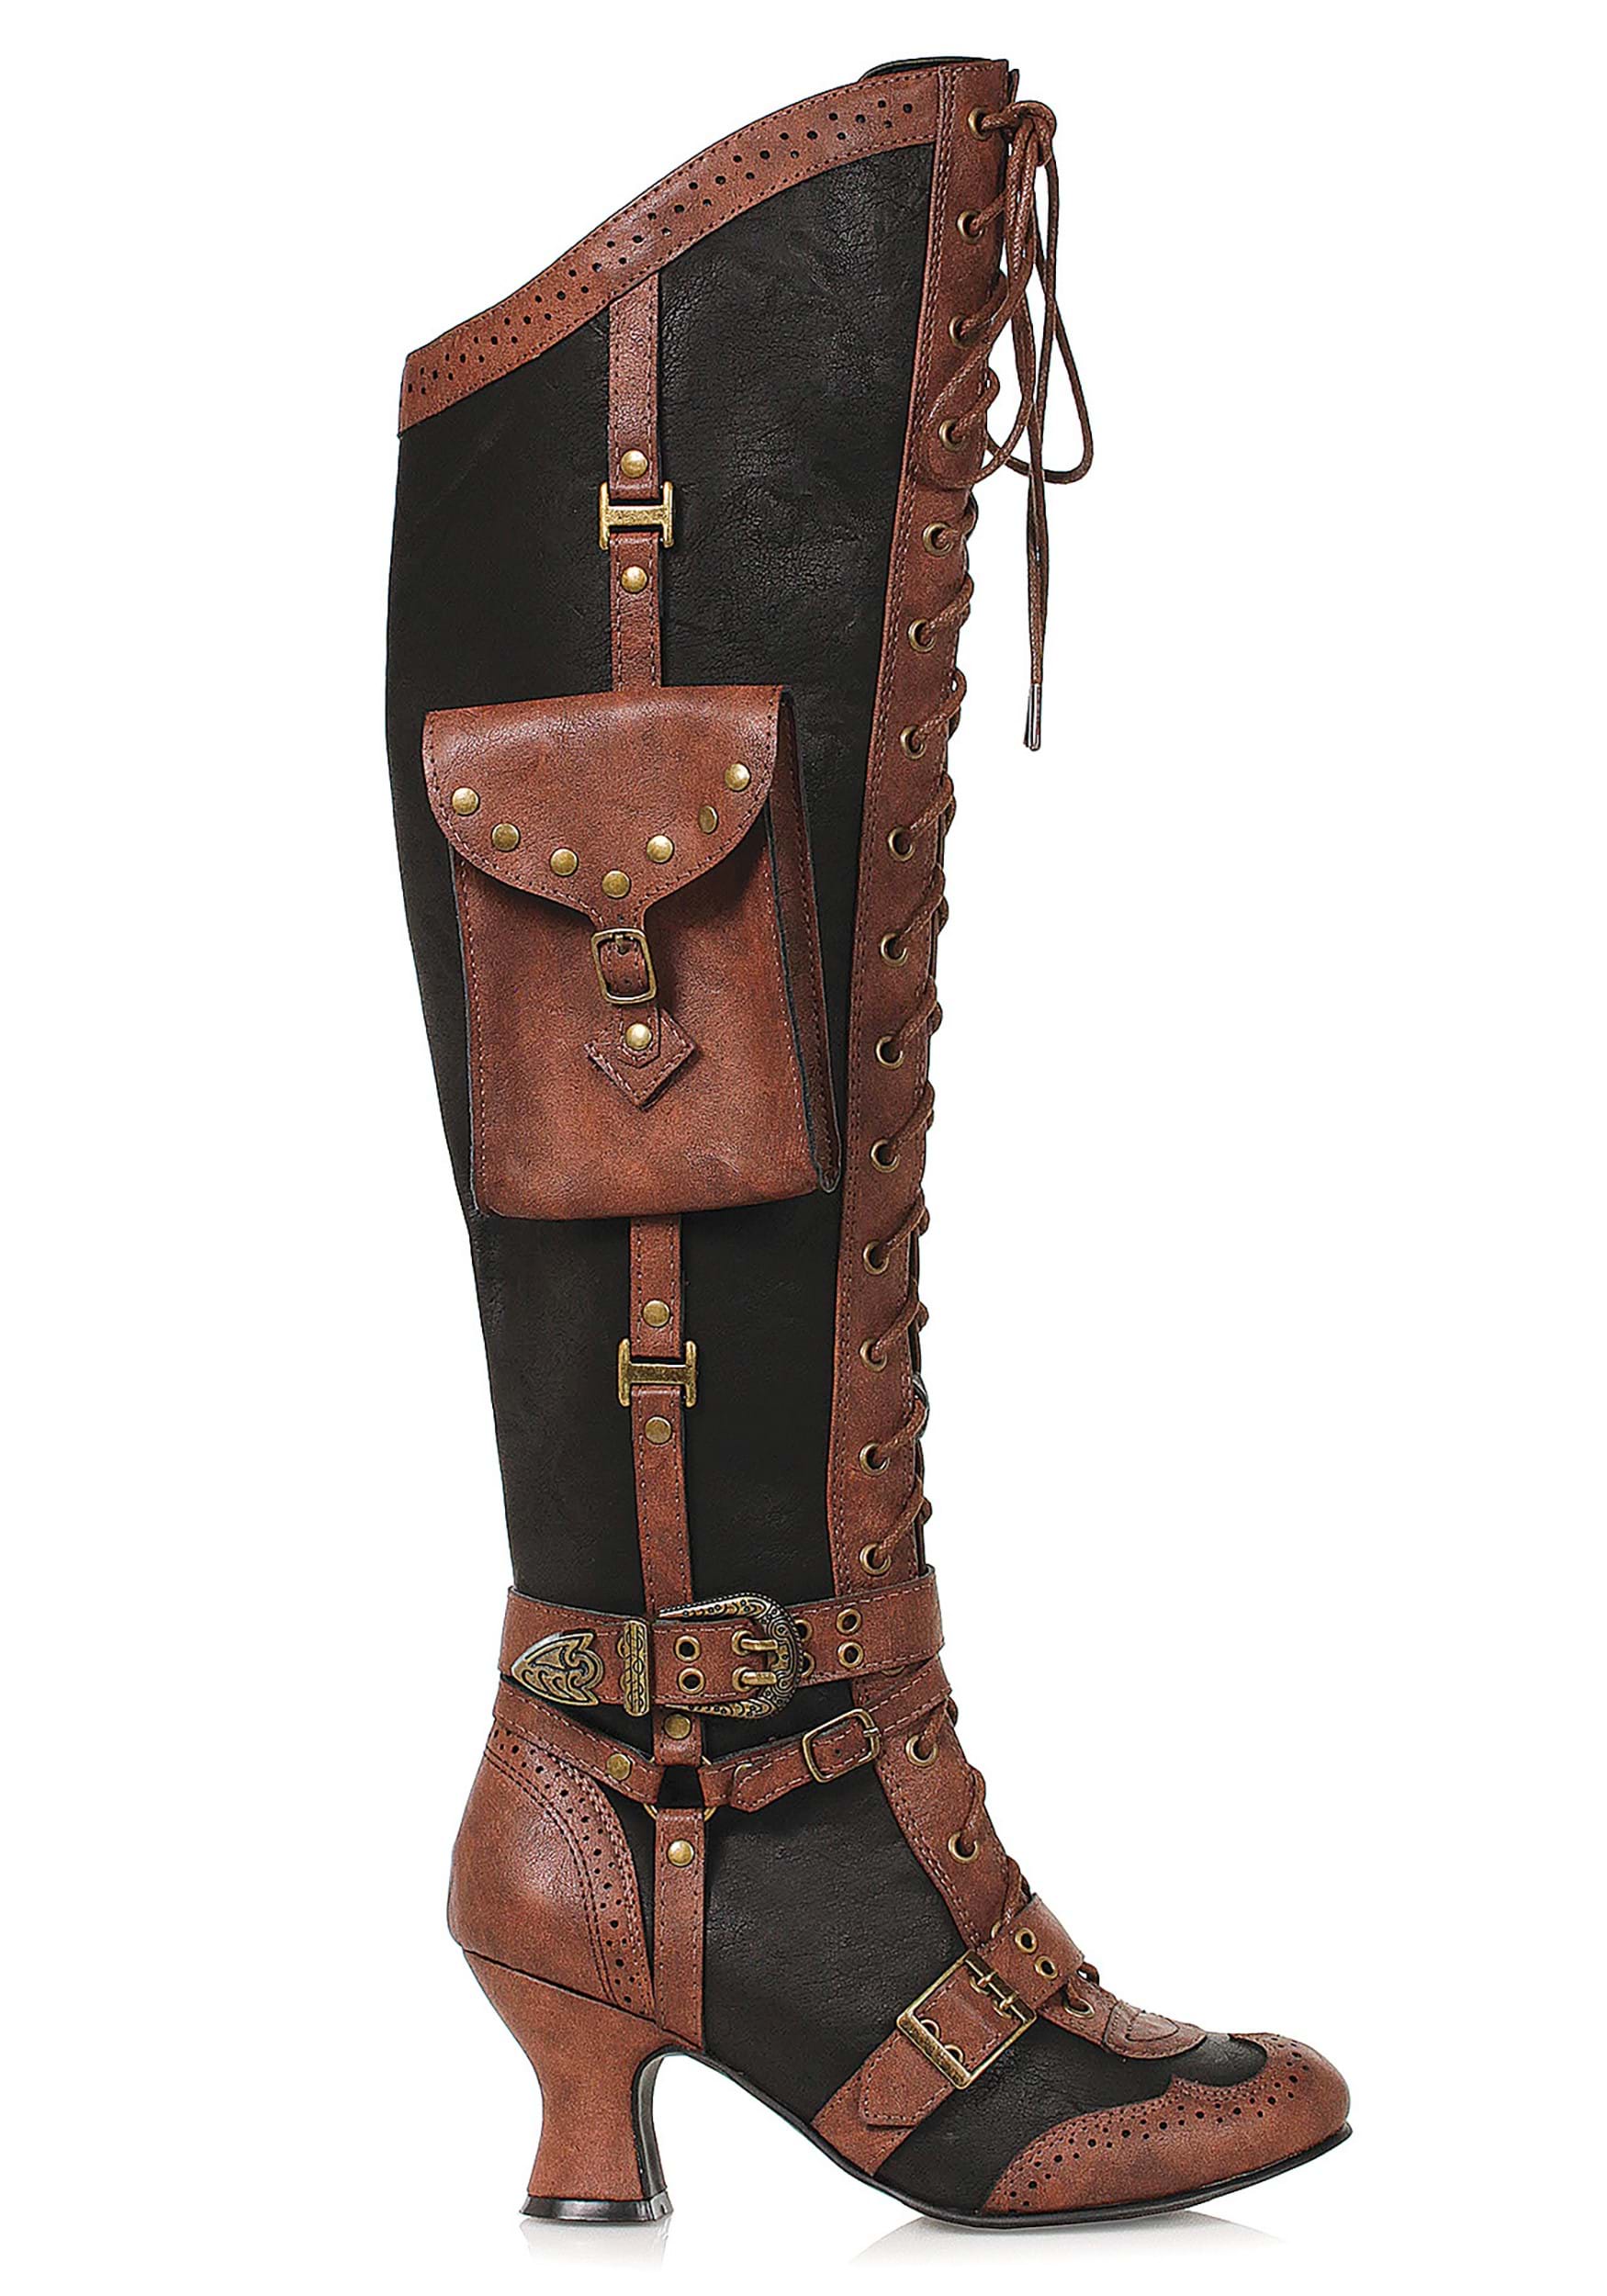 Image of Lace Up Steampunk Heeled Boots ID EE254INGRIDBR-9